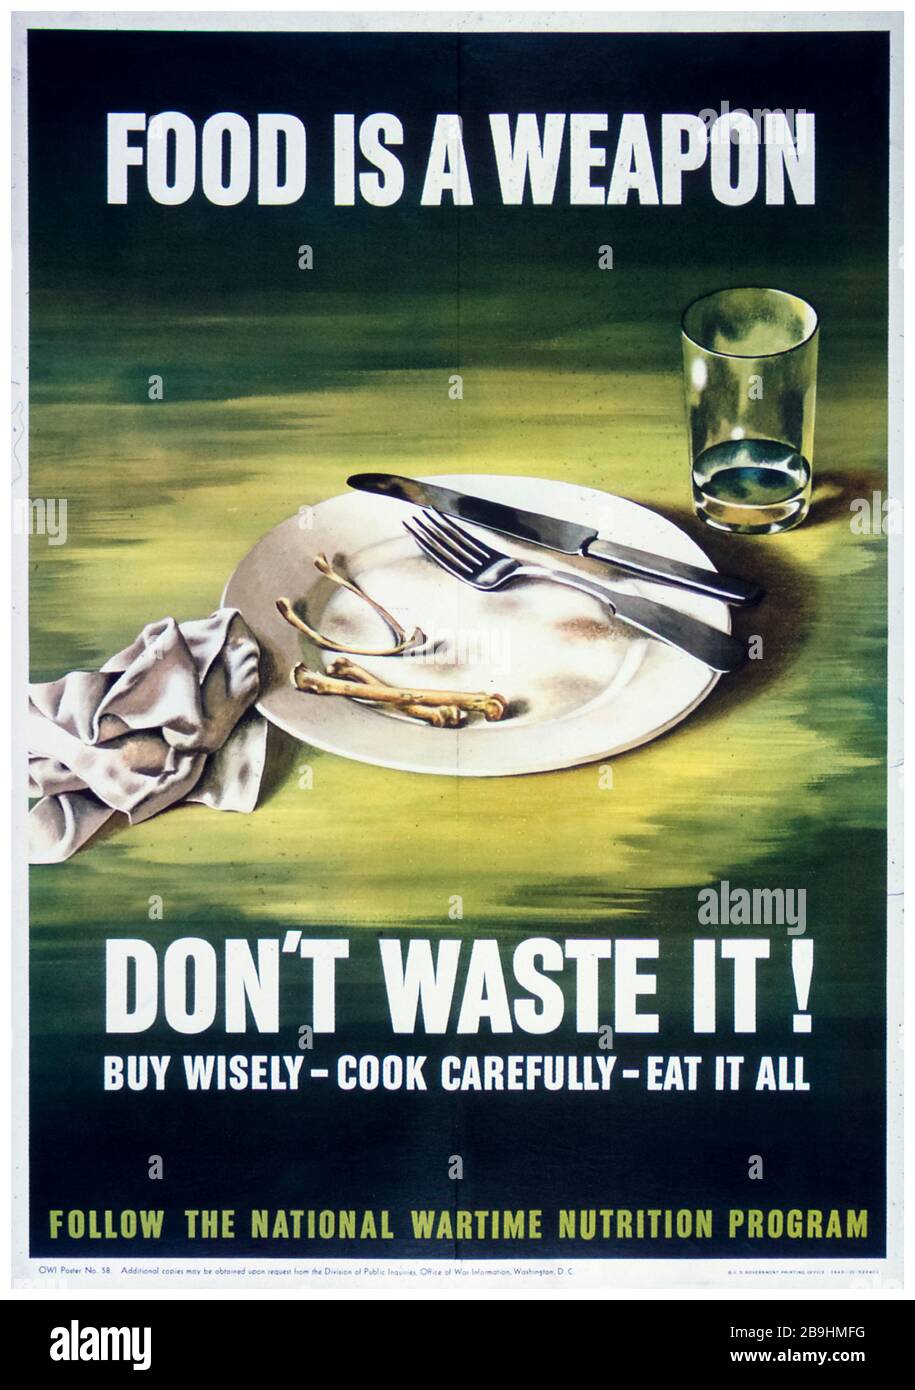 American WW2 Food rationing poster, saving food campaign, Food is a Weapon - Don't Waste it, 1941-1945 Stock Photo